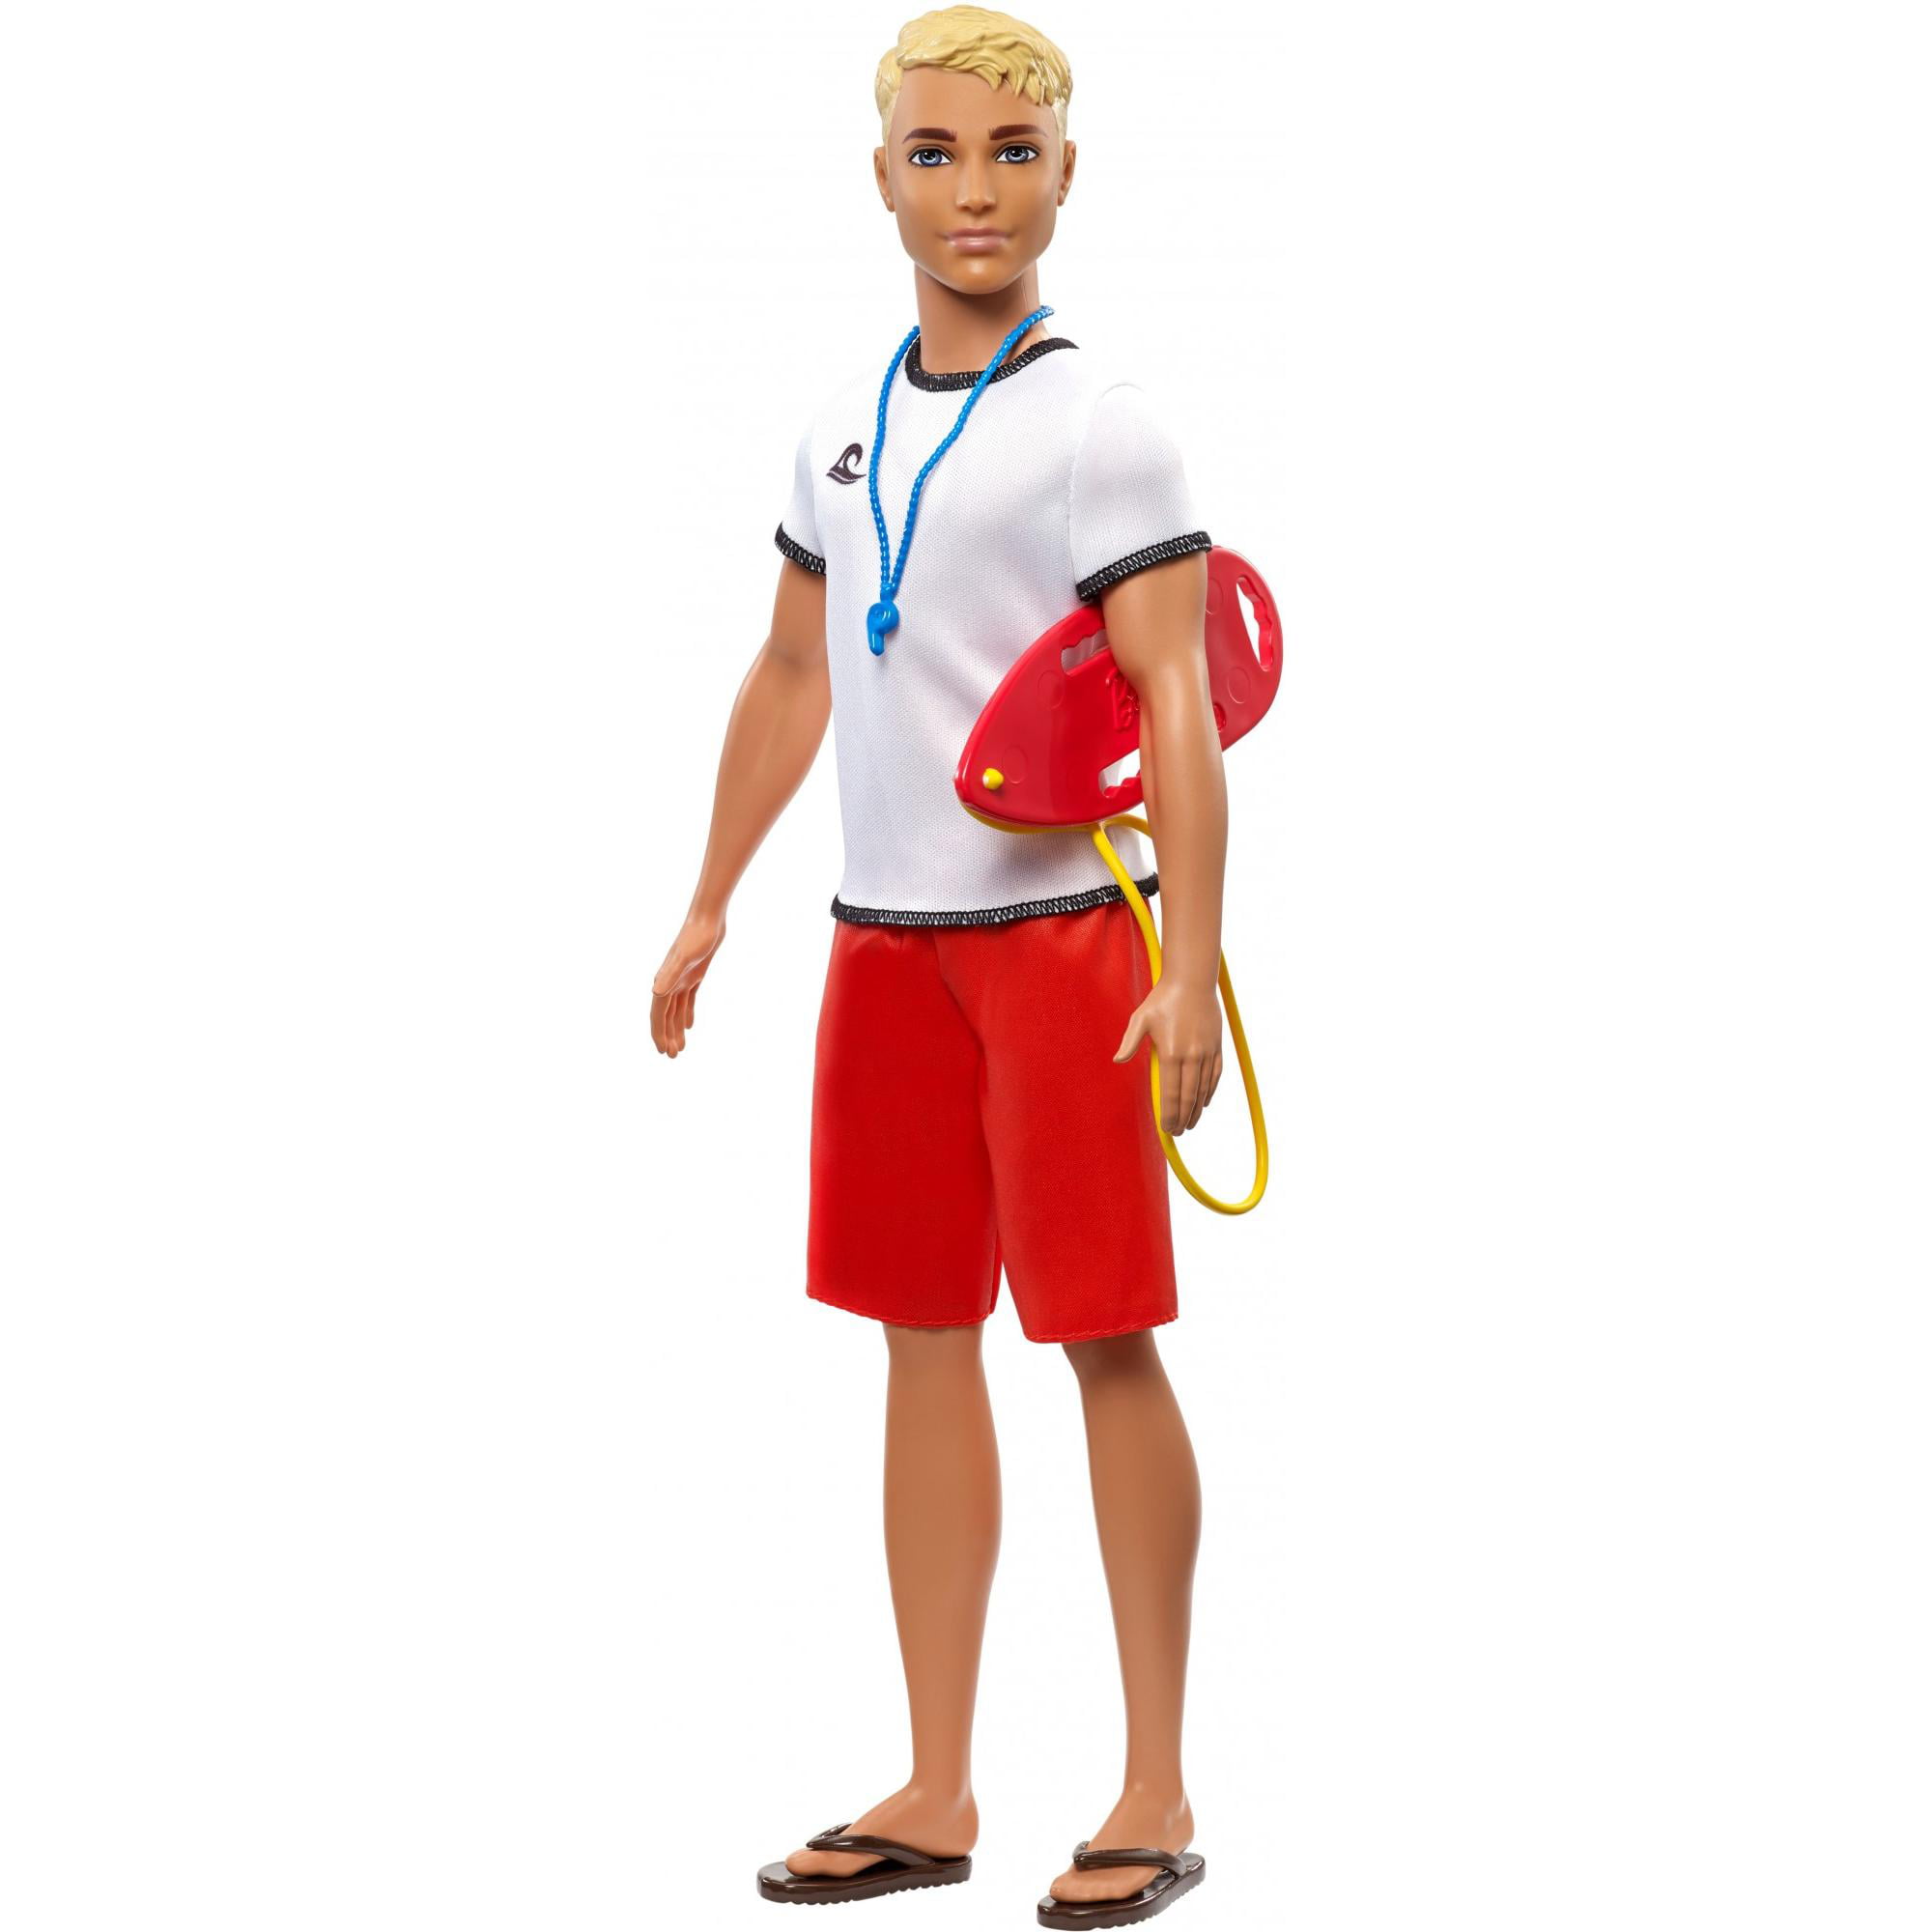 Barbie Footballer/Soccer Ken Doll in Career-Themed Outfit with Ball 